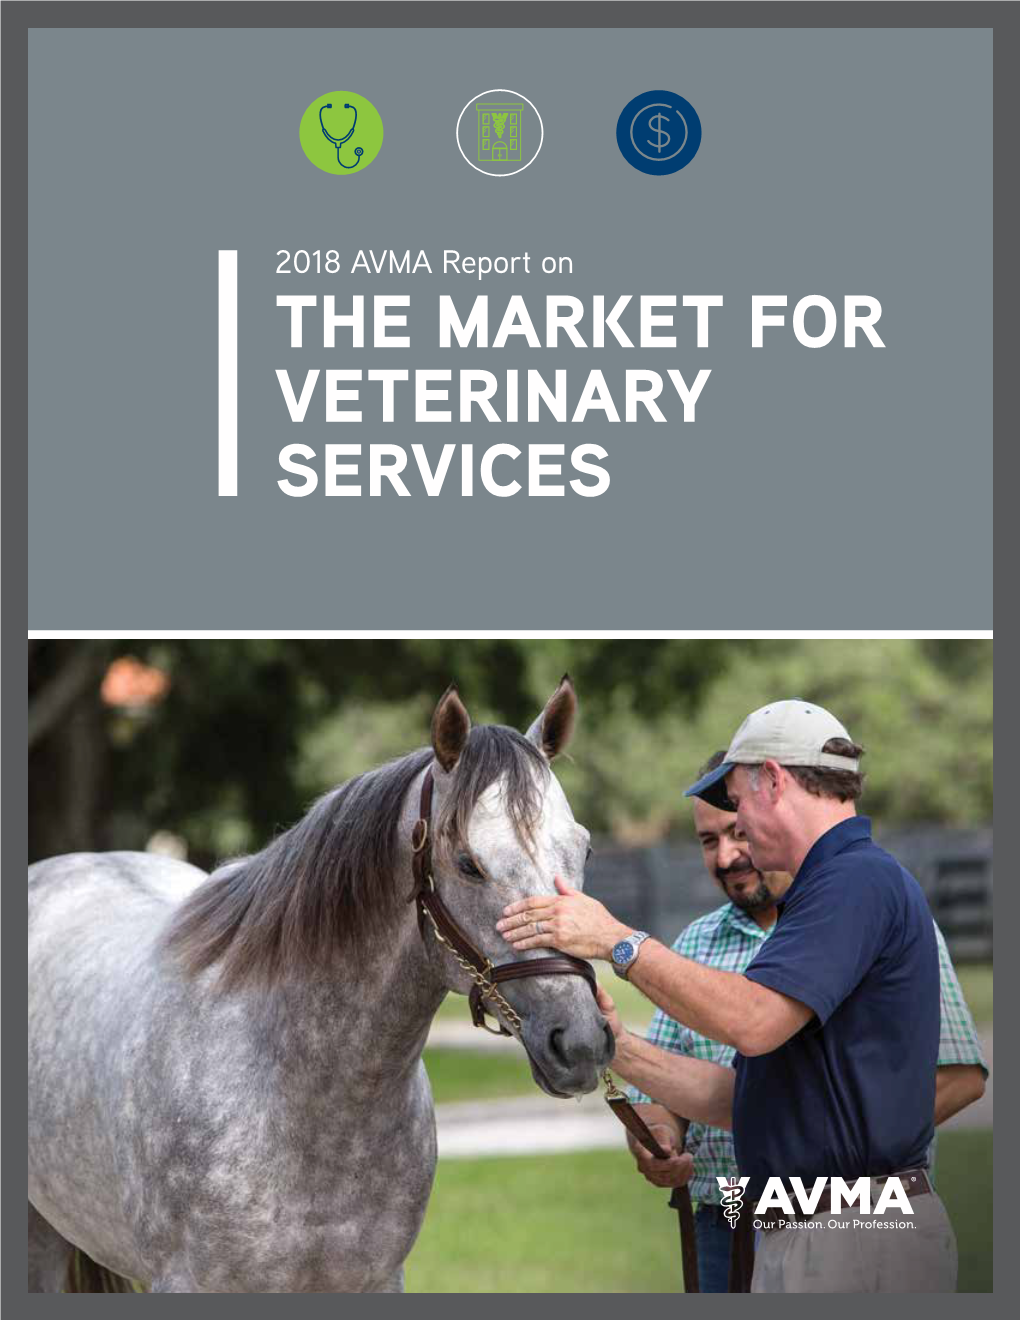 The Market for Veterinary Services